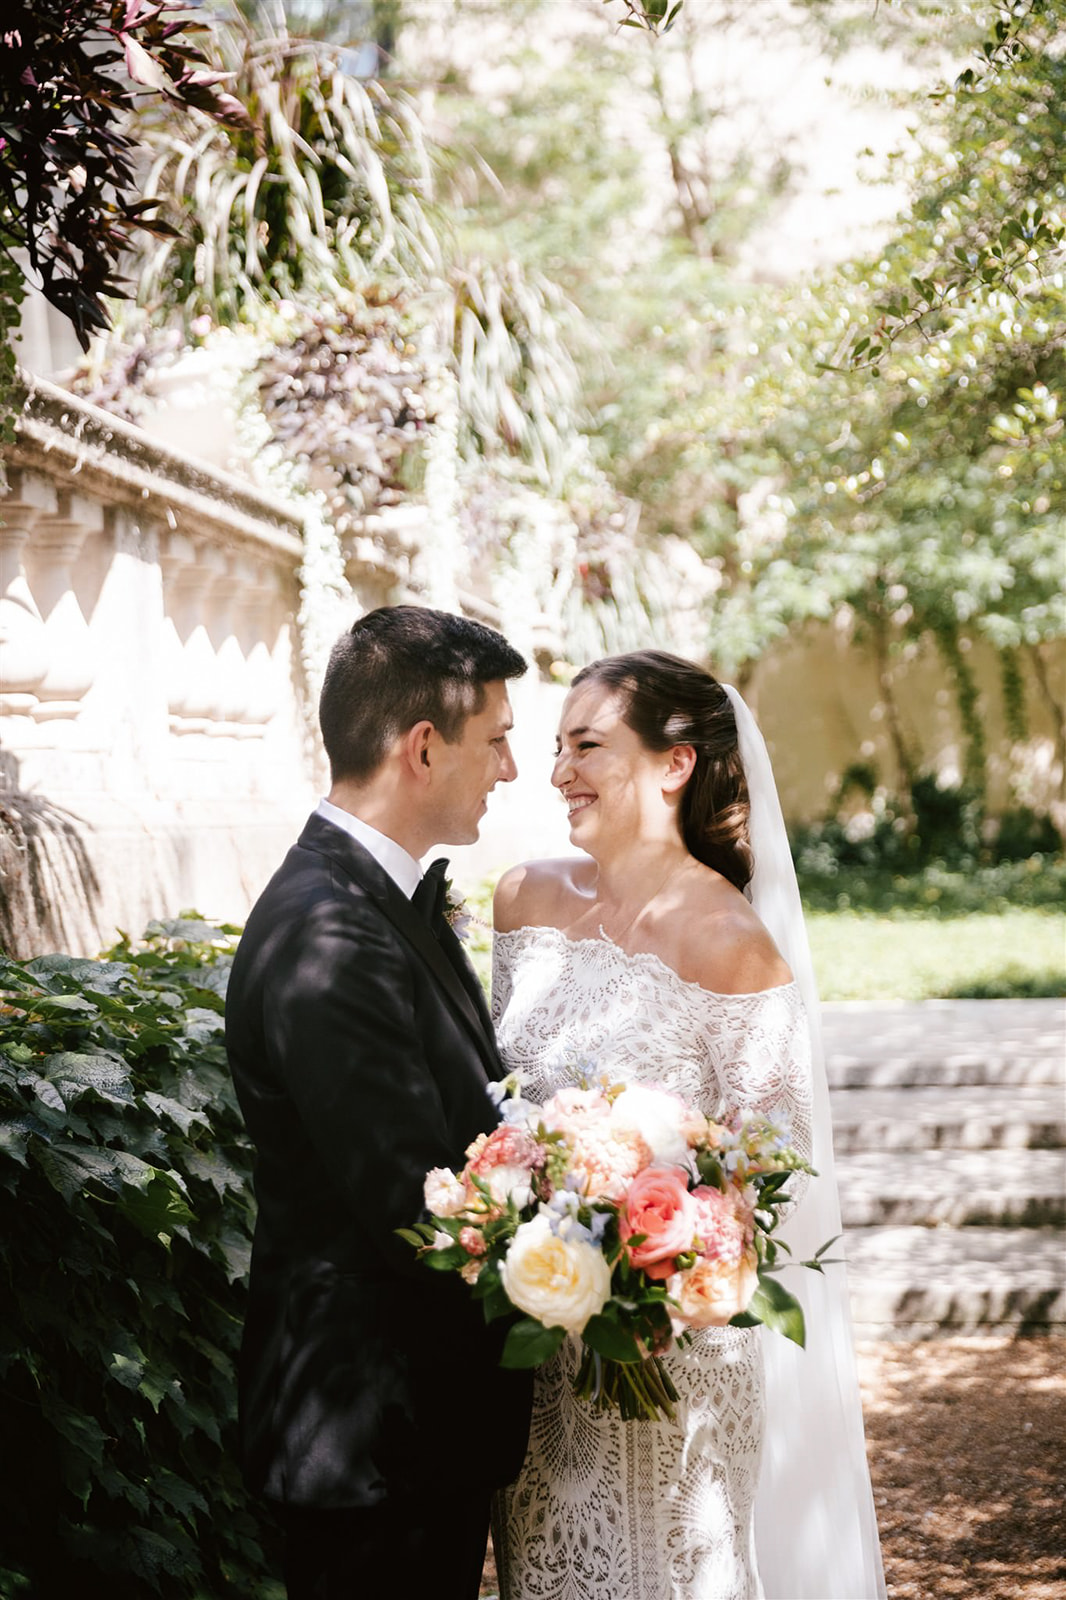 Captivating snapshots of the bride and groom amidst the lush surroundings of the Art Institute gardens.